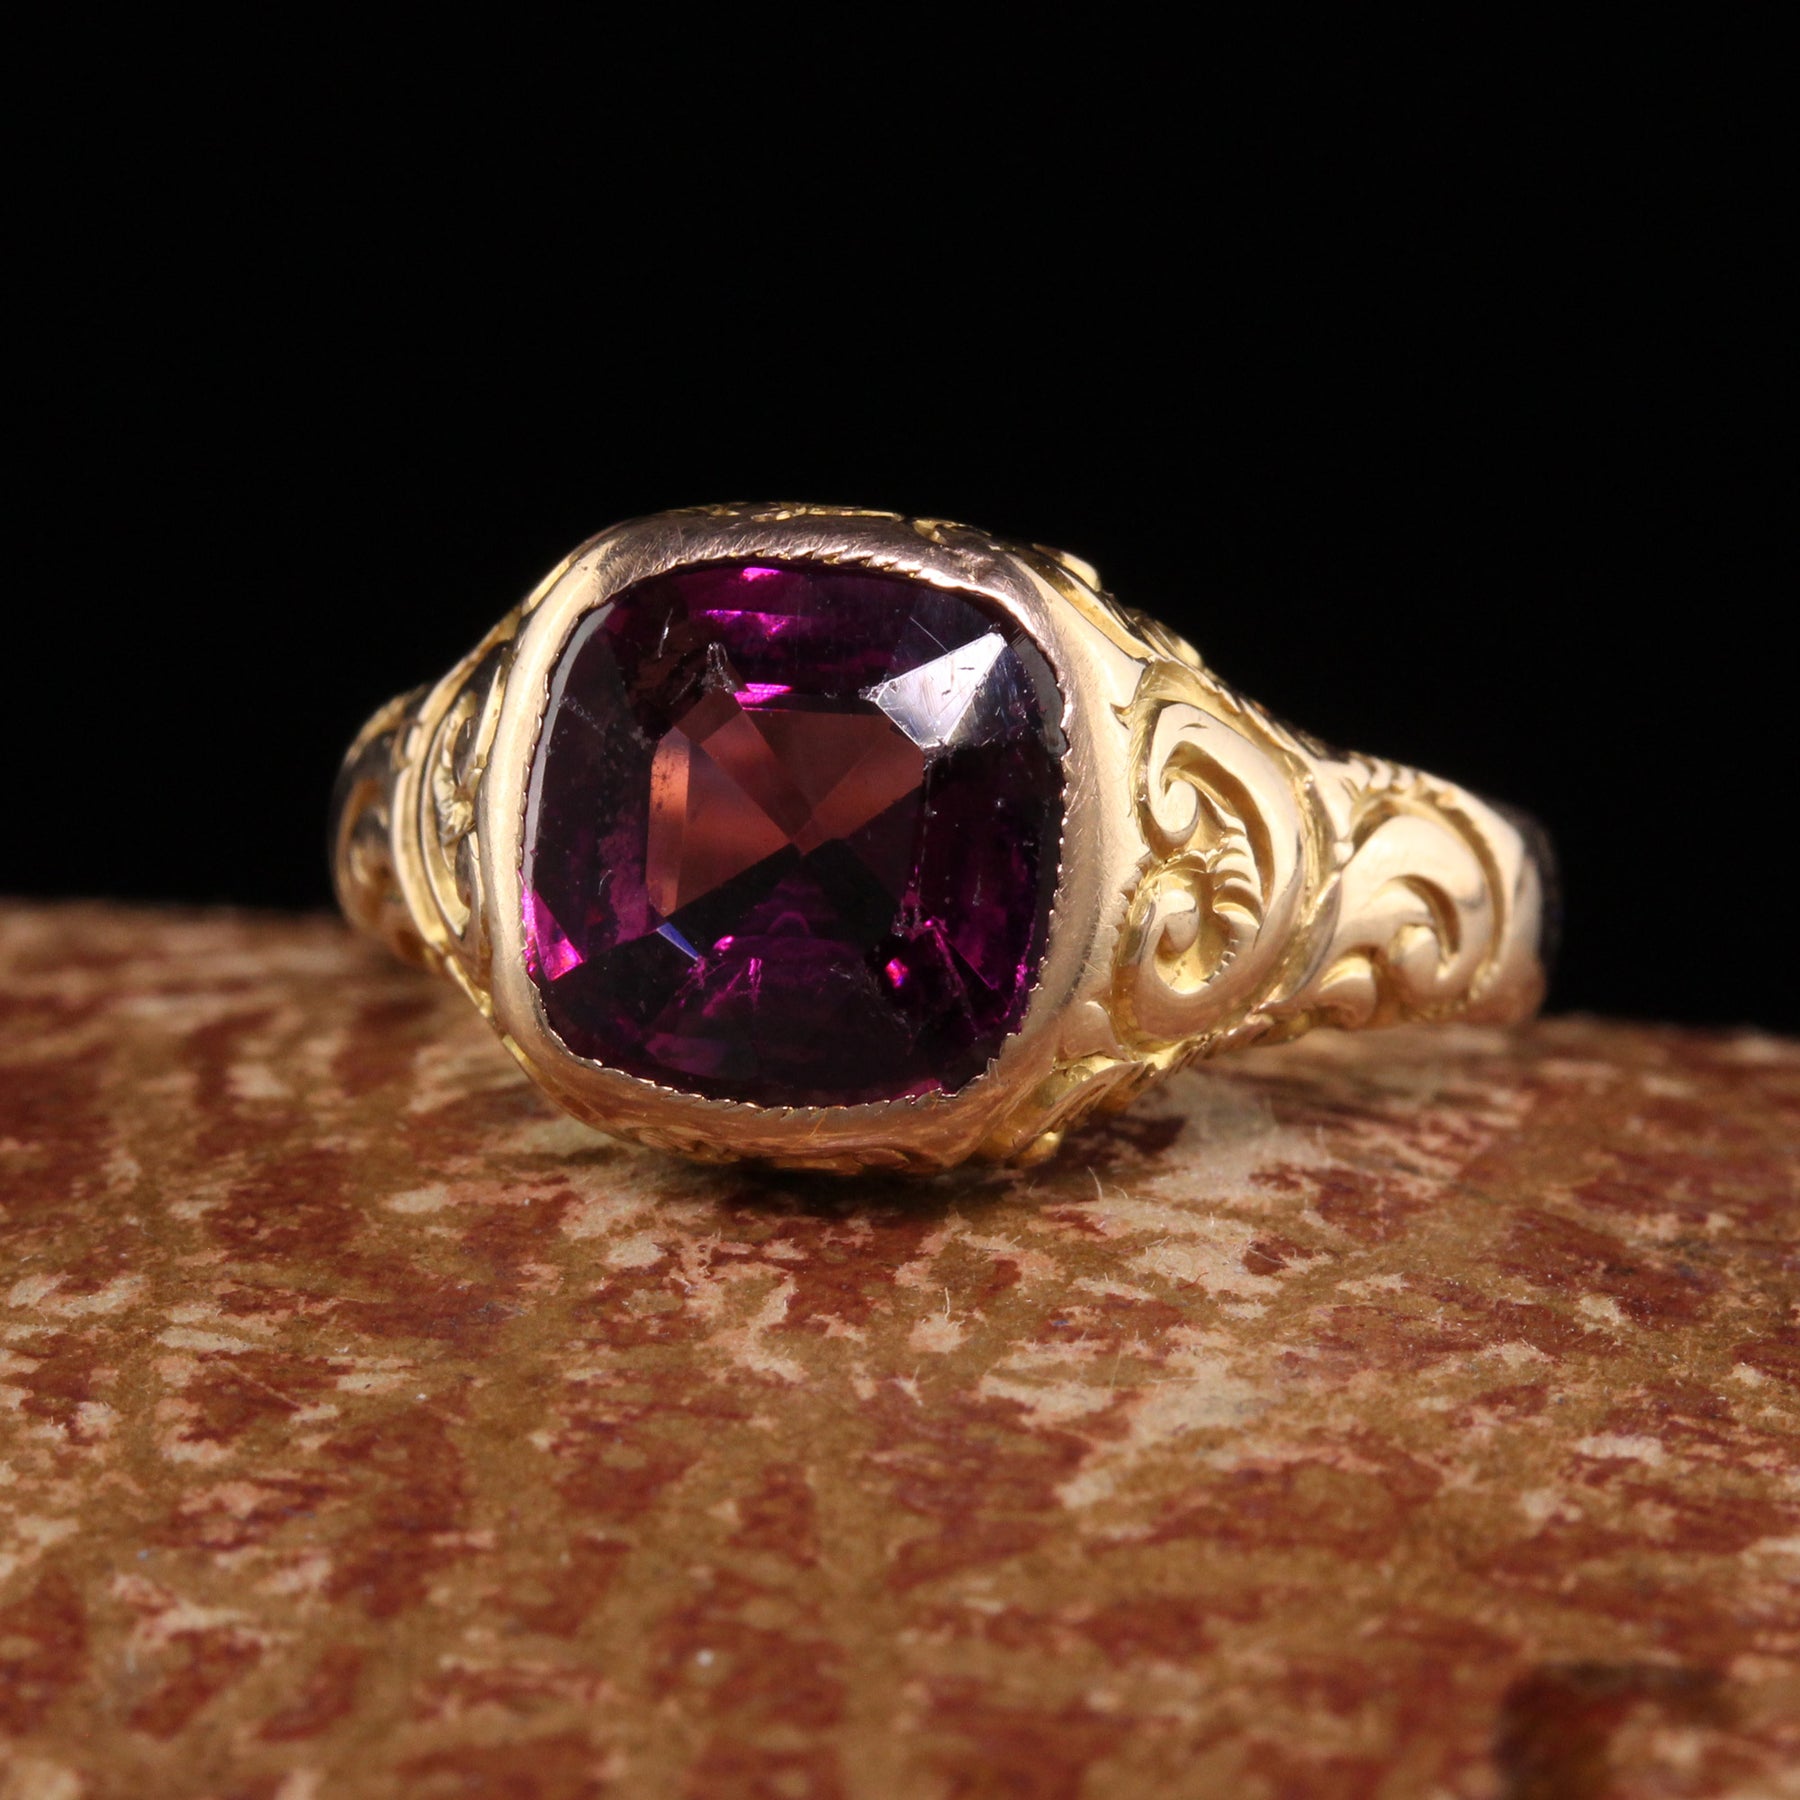 Ancient South East Asian Indonesian Antiquities Gold Jewelry Ring Garnet  Gems